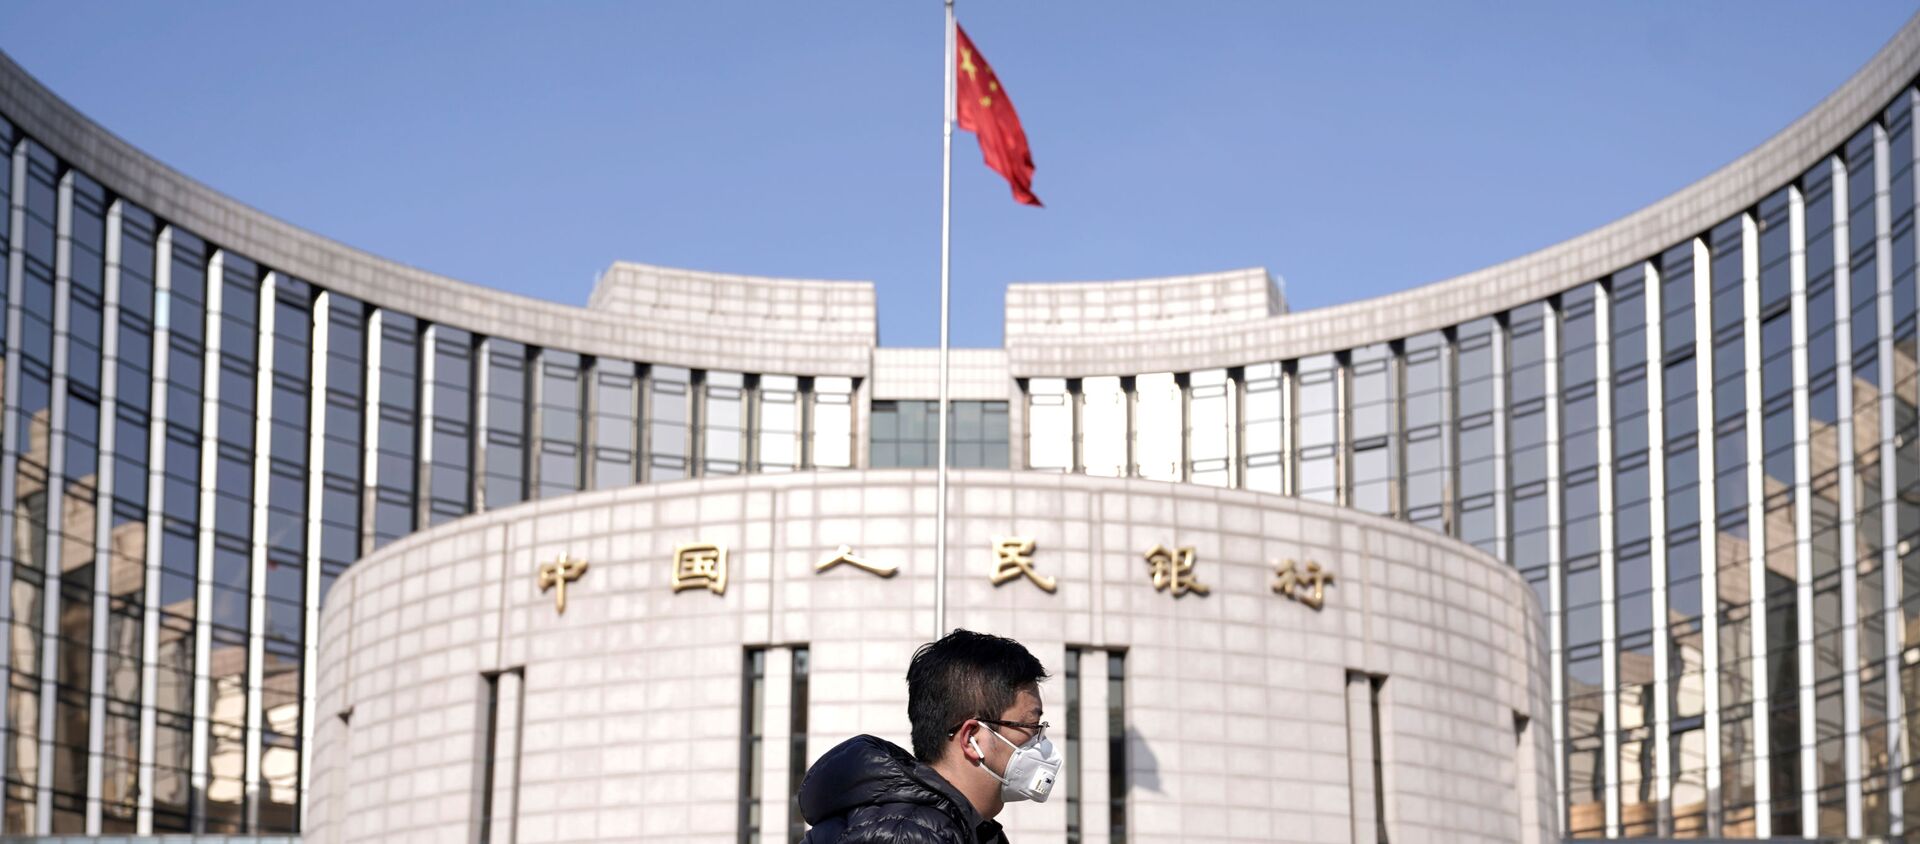 A man wearing a mask walks past the headquarters of the People's Bank of China, the central bank, in Beijing, China, as the country is hit by an outbreak of the new coronavirus, February 3, 2020 - Sputnik International, 1920, 09.10.2020